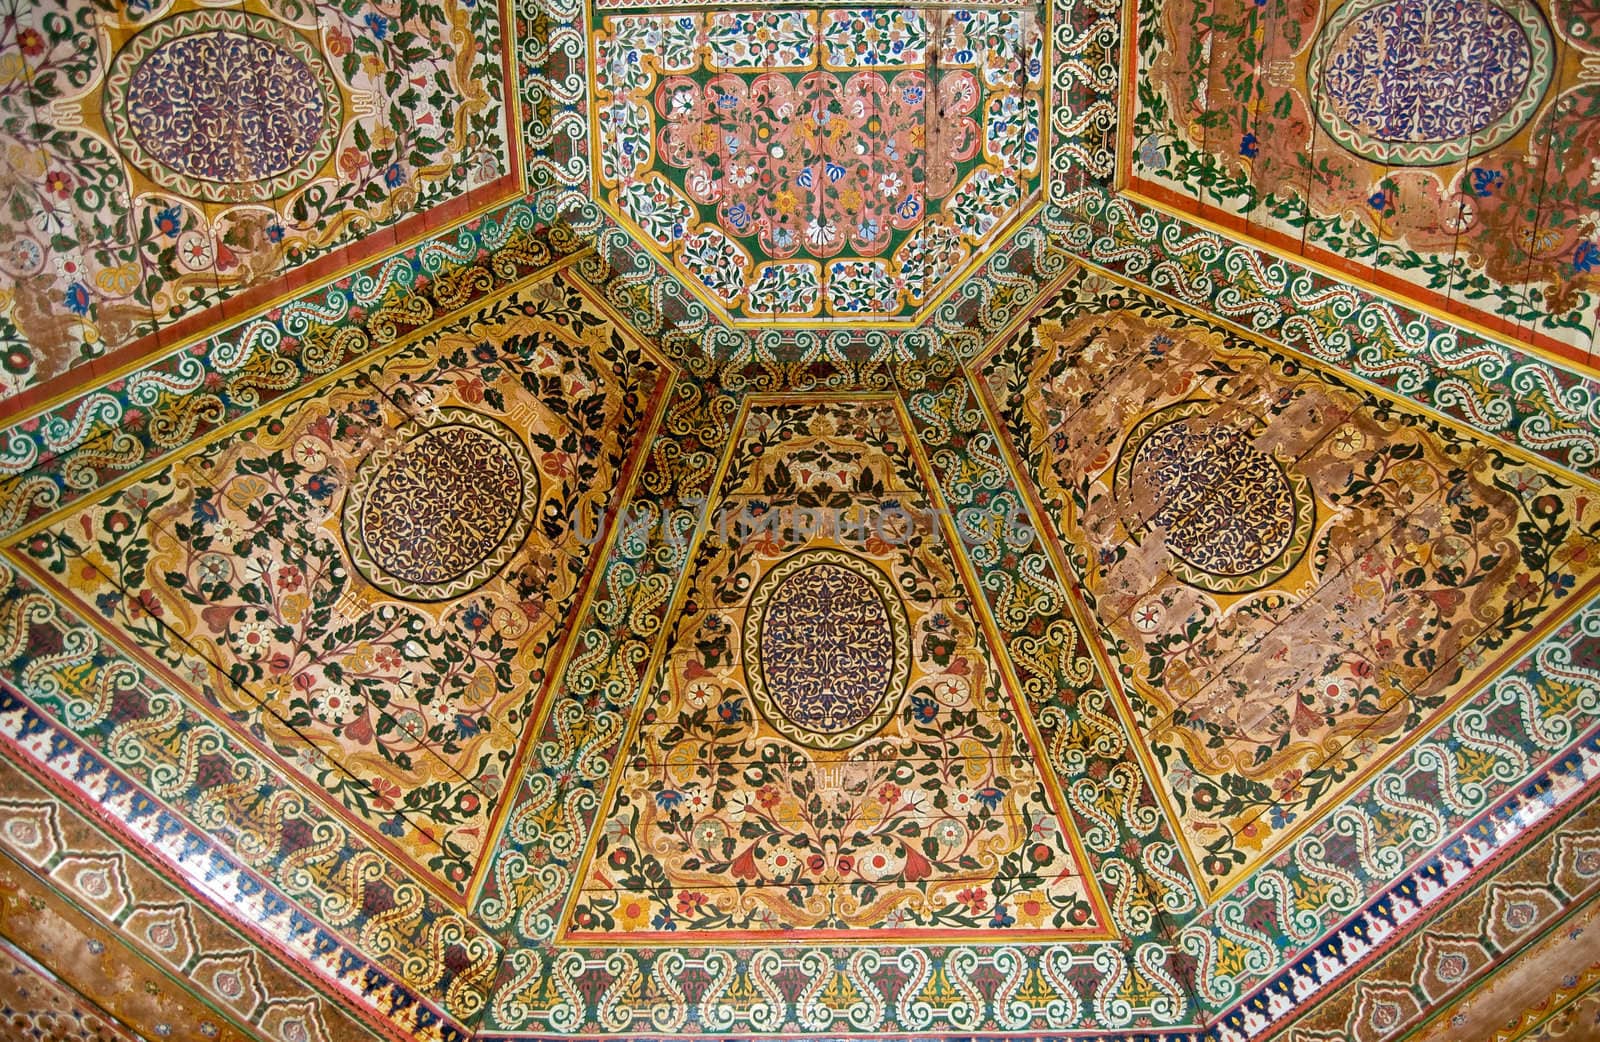 A painted wooden ceiling of the Bahia Palace in Marrakesh, Moroc